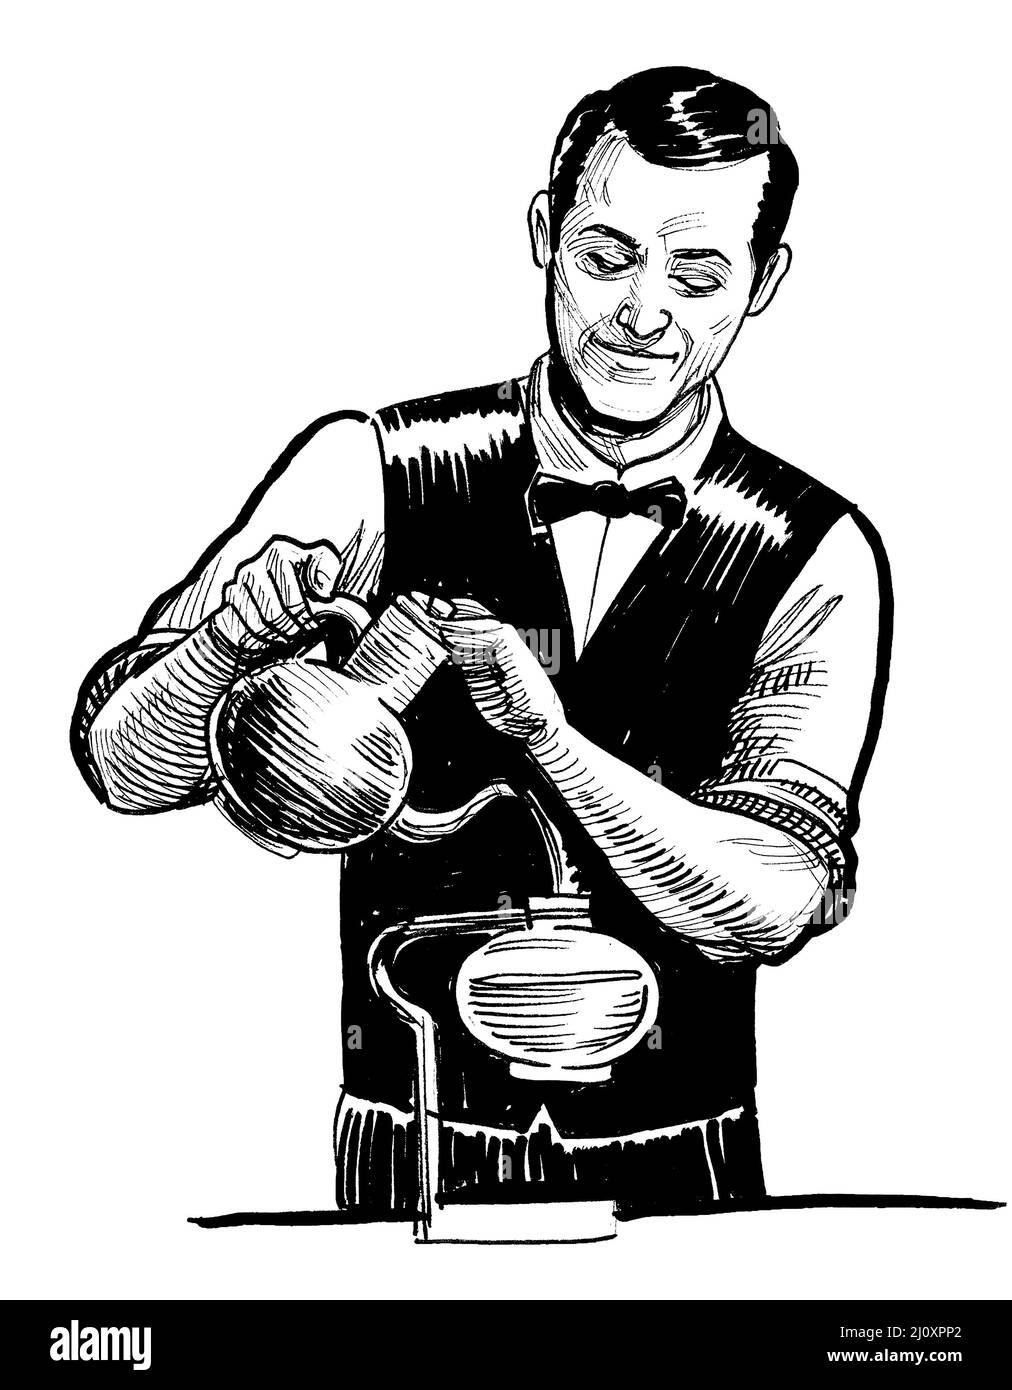 Barista brewing coffee. Ink black and white drawing Stock Photo